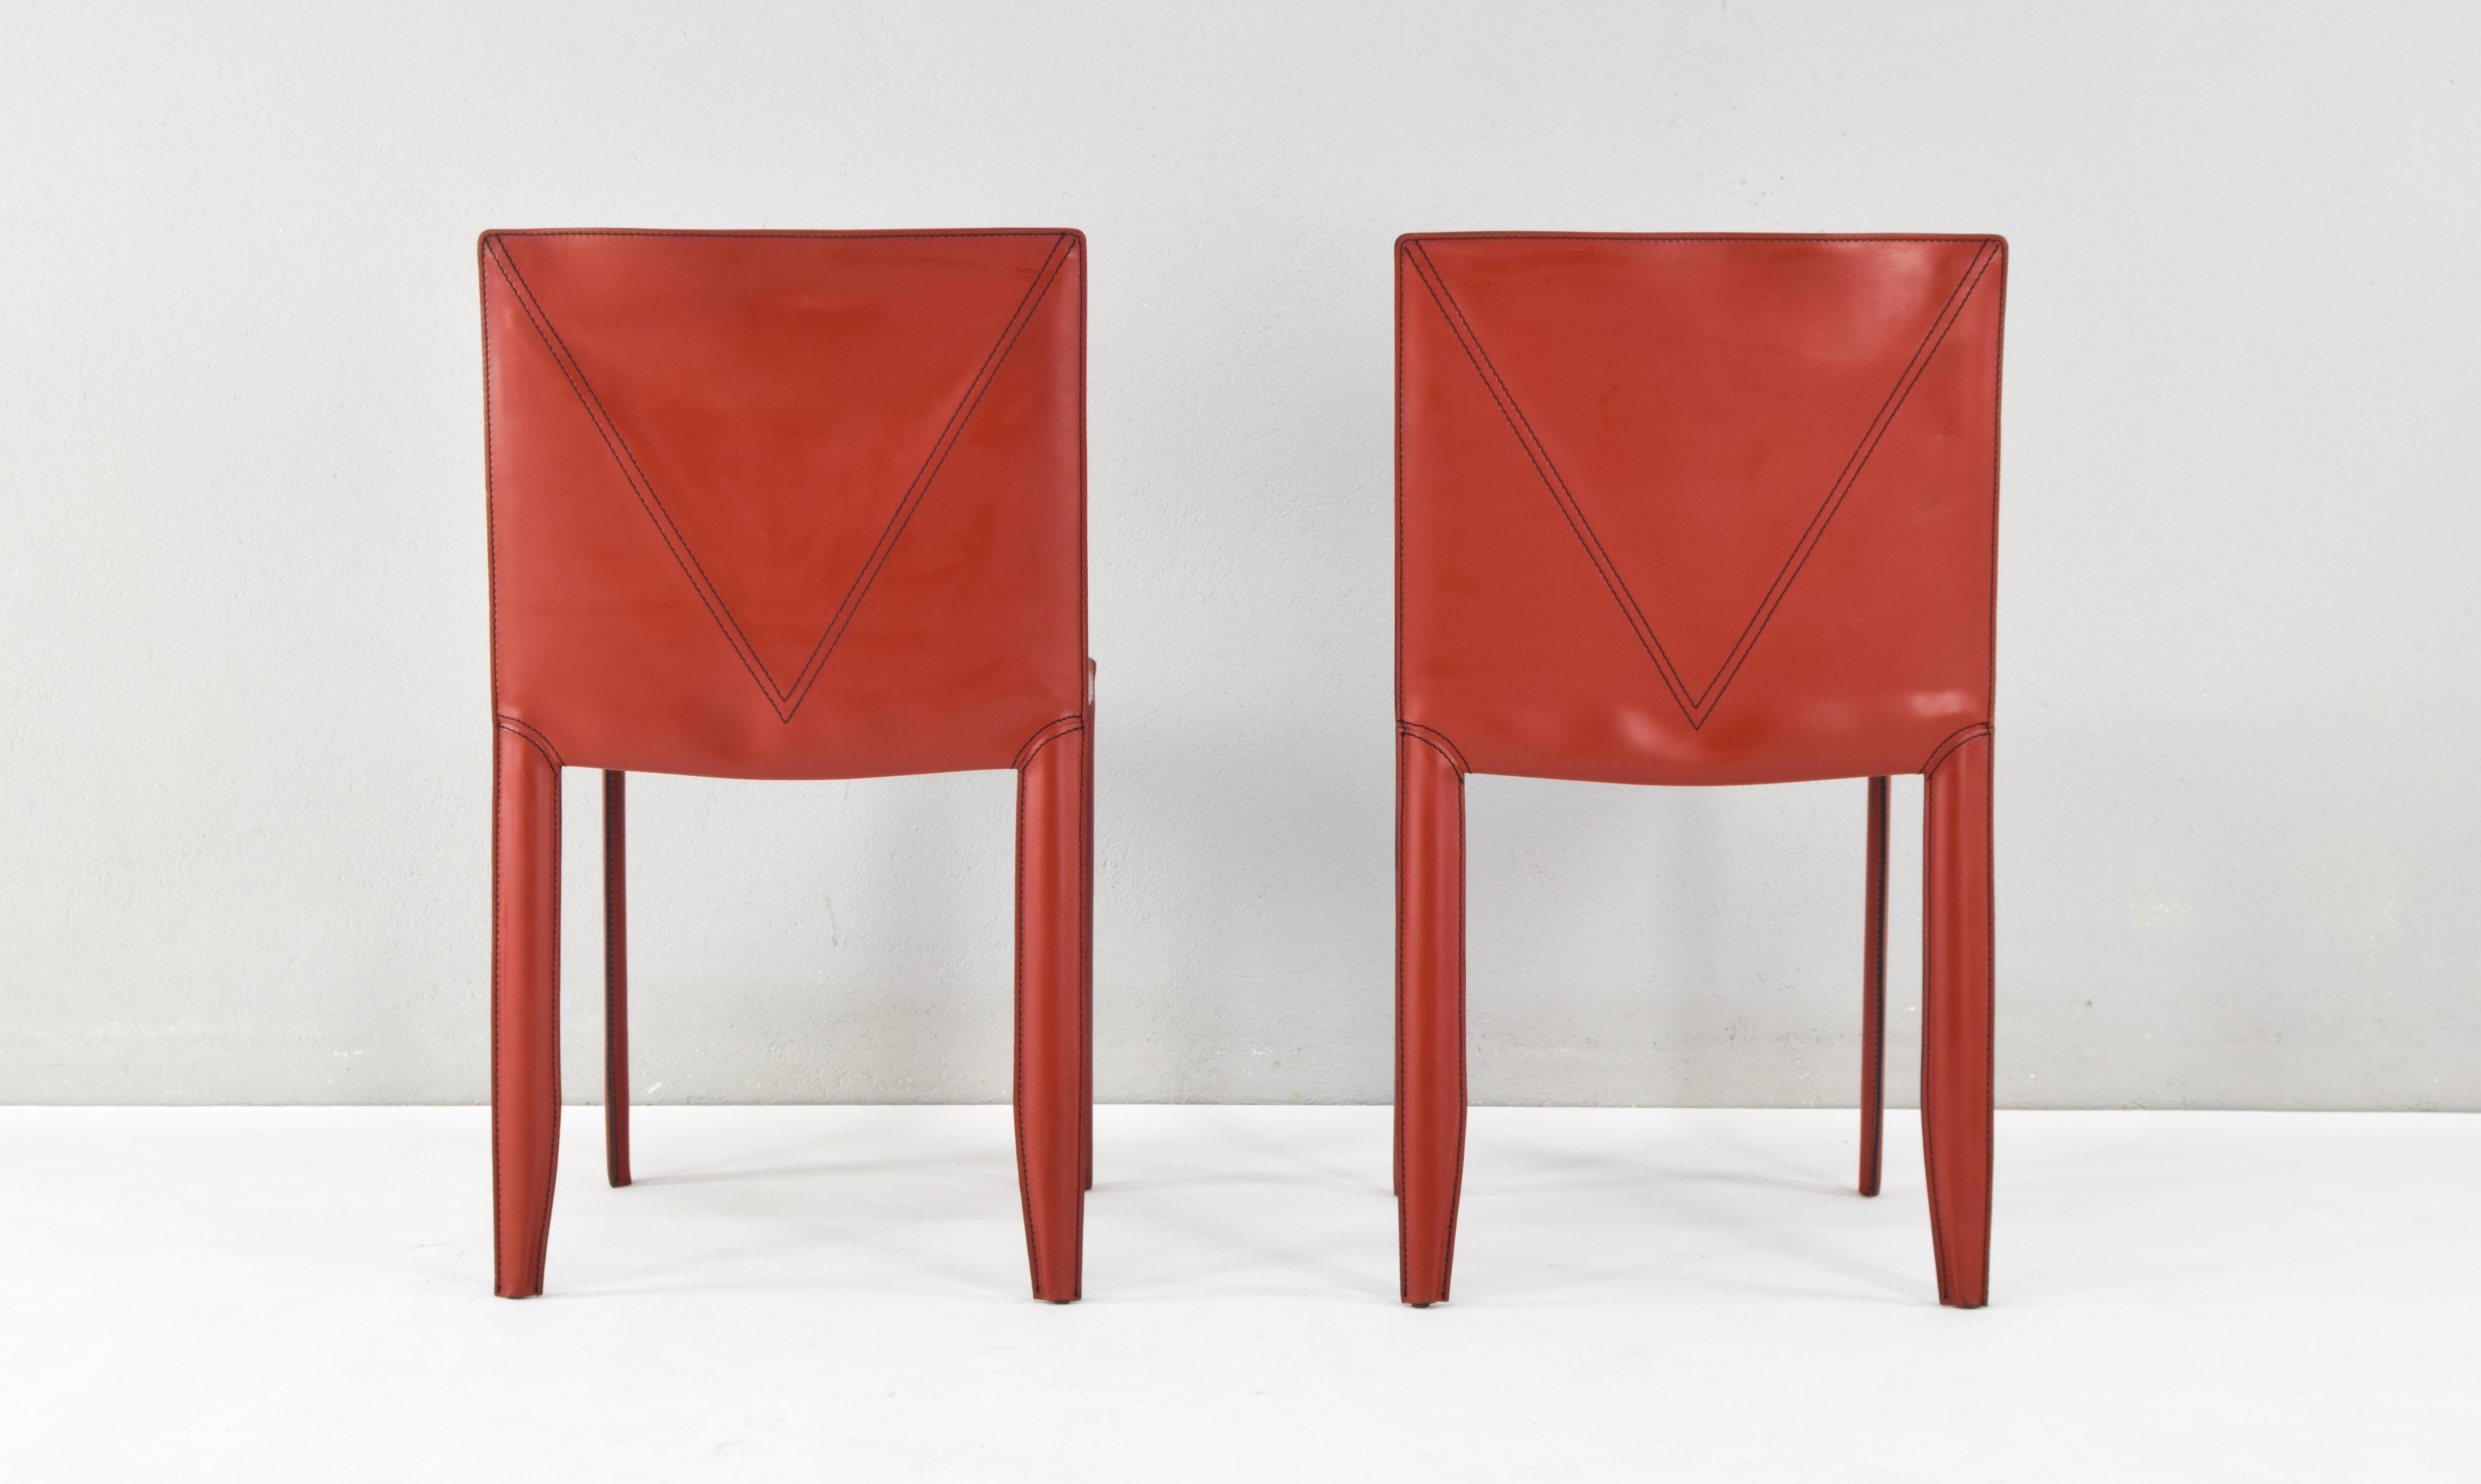 Piuma Italian Modern Leather Chairs Set of Two by Studio Kronos for Cattelan 90s 2